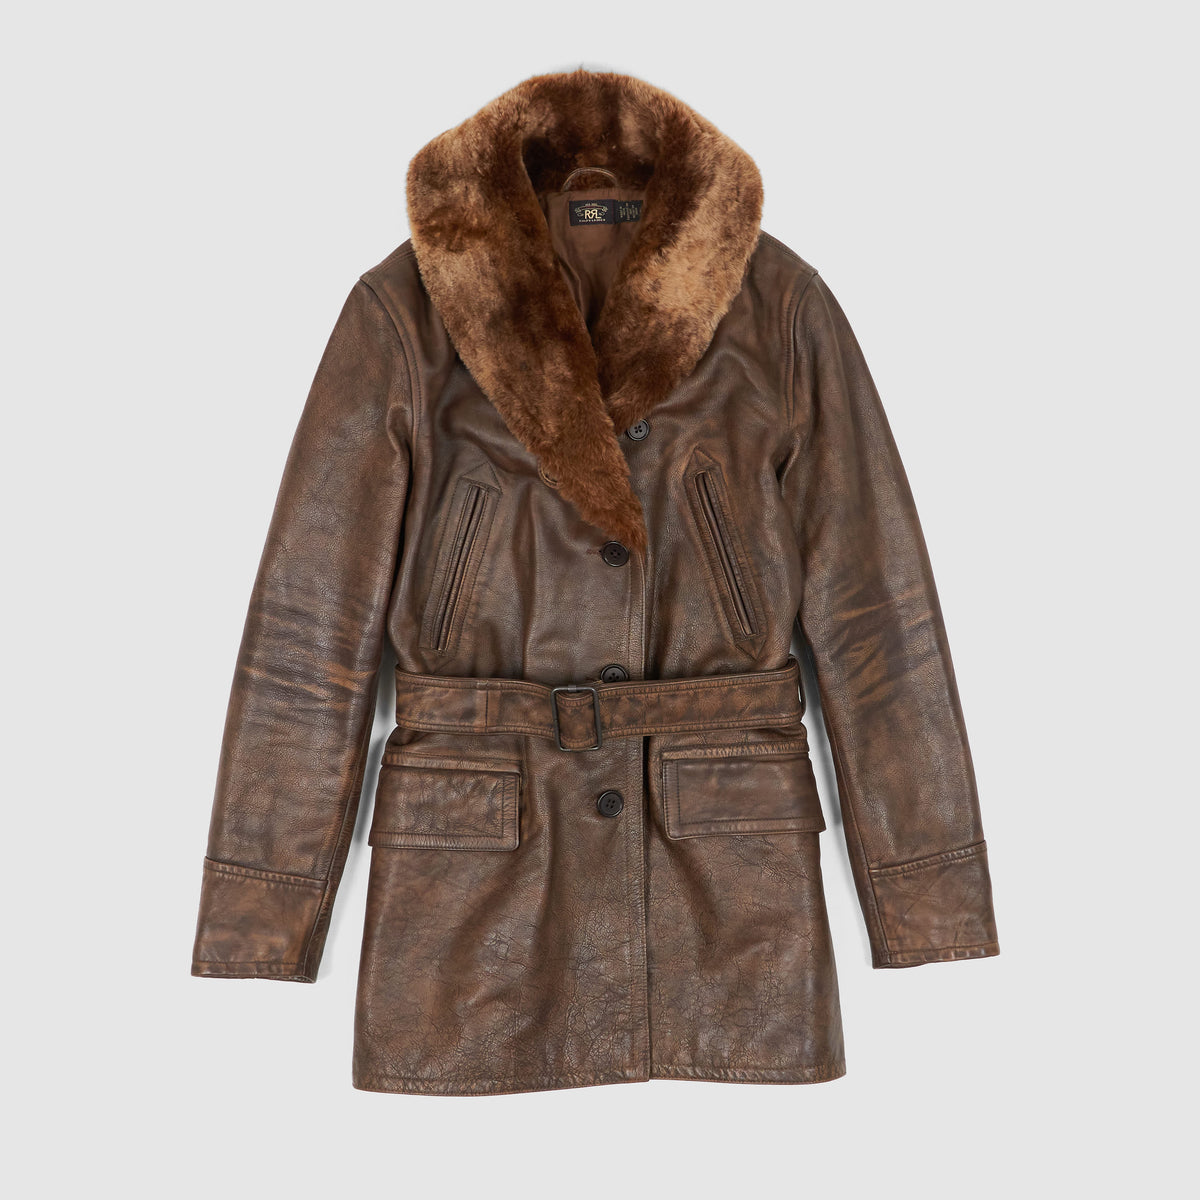 Double RL Ladies Shearling- Collar Leather Coat Jacket